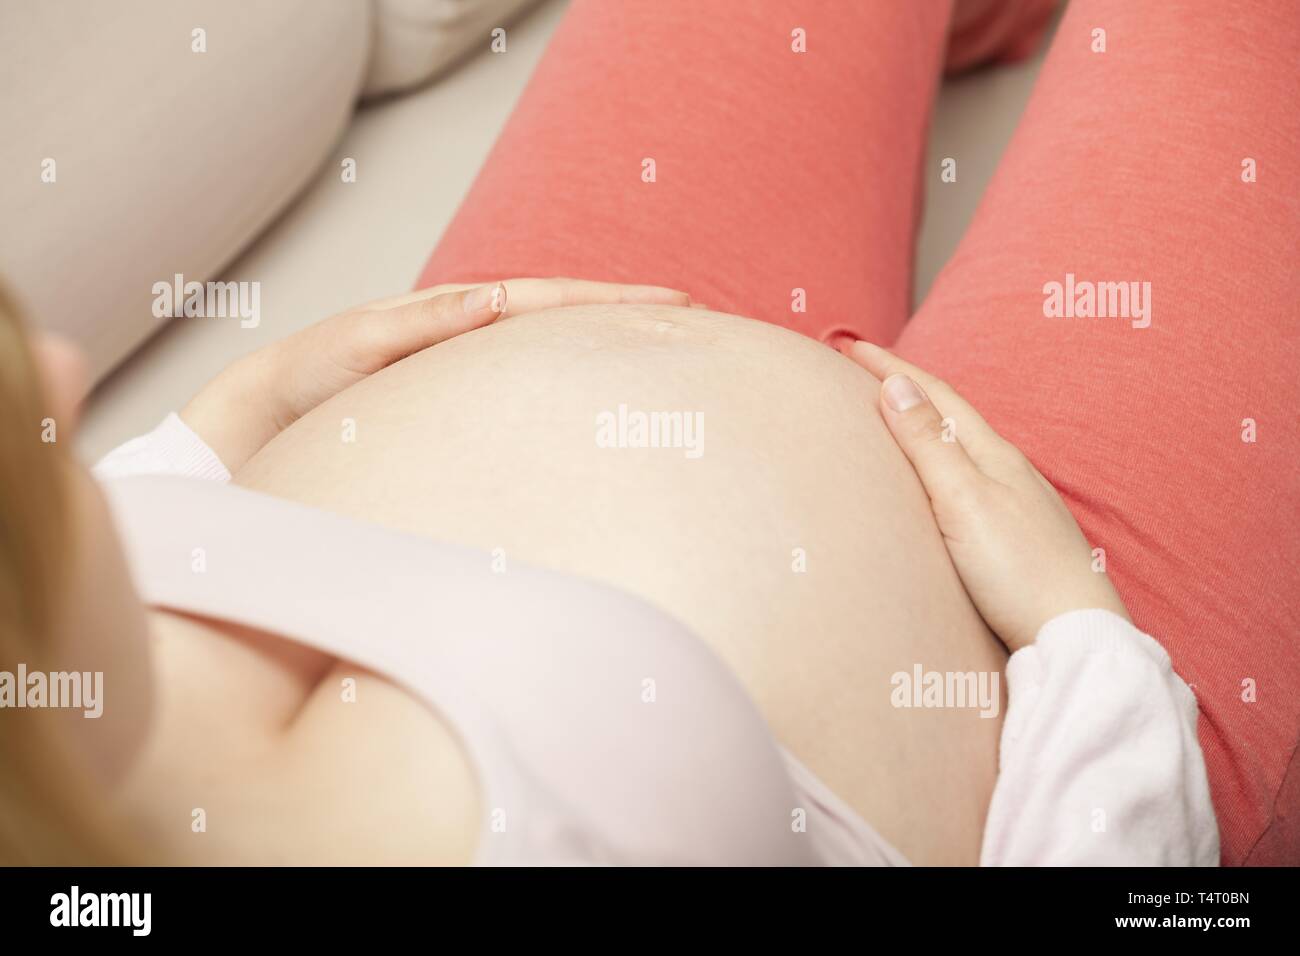 Pregnant woman has her hands on baby belly Stock Photo